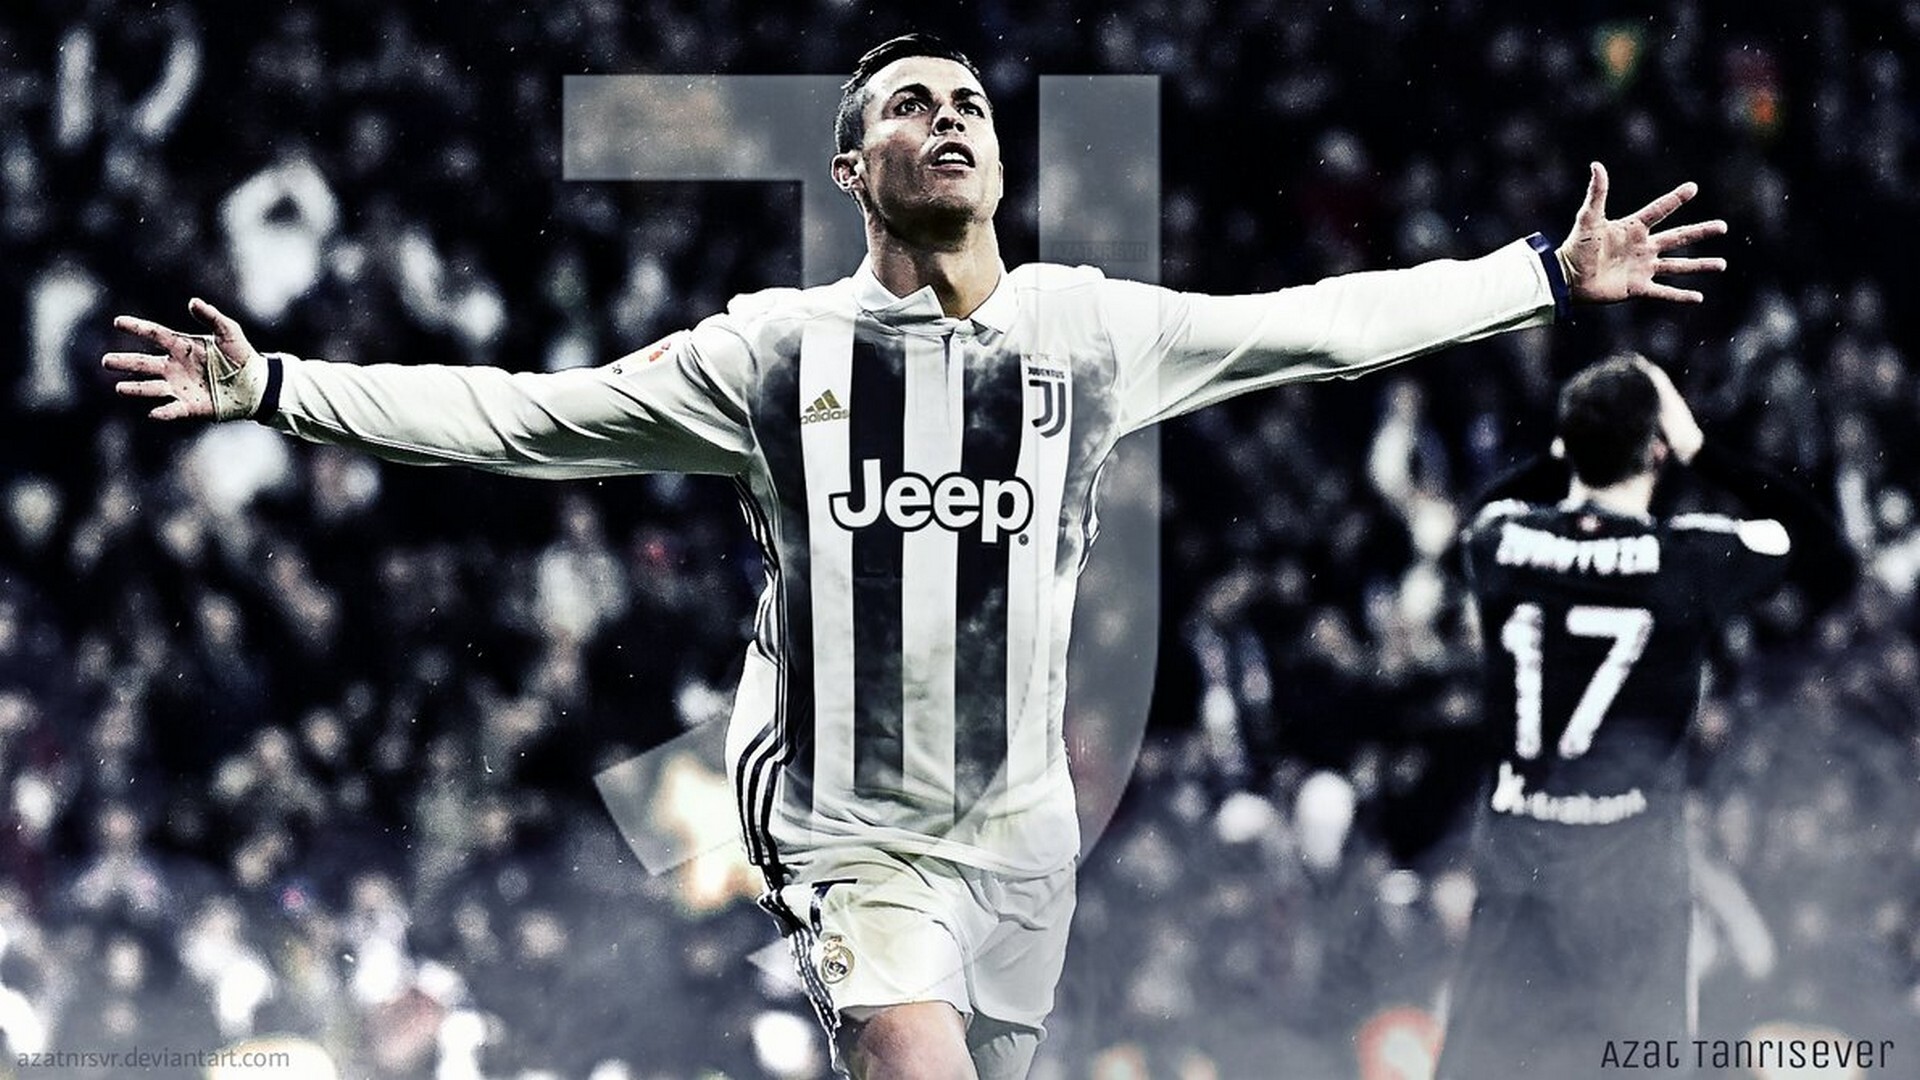 Wallpaper C Ronaldo Juventus Desktop with image resolution 1920x1080 pixel. You can use this wallpaper as background for your desktop Computer Screensavers, Android or iPhone smartphones